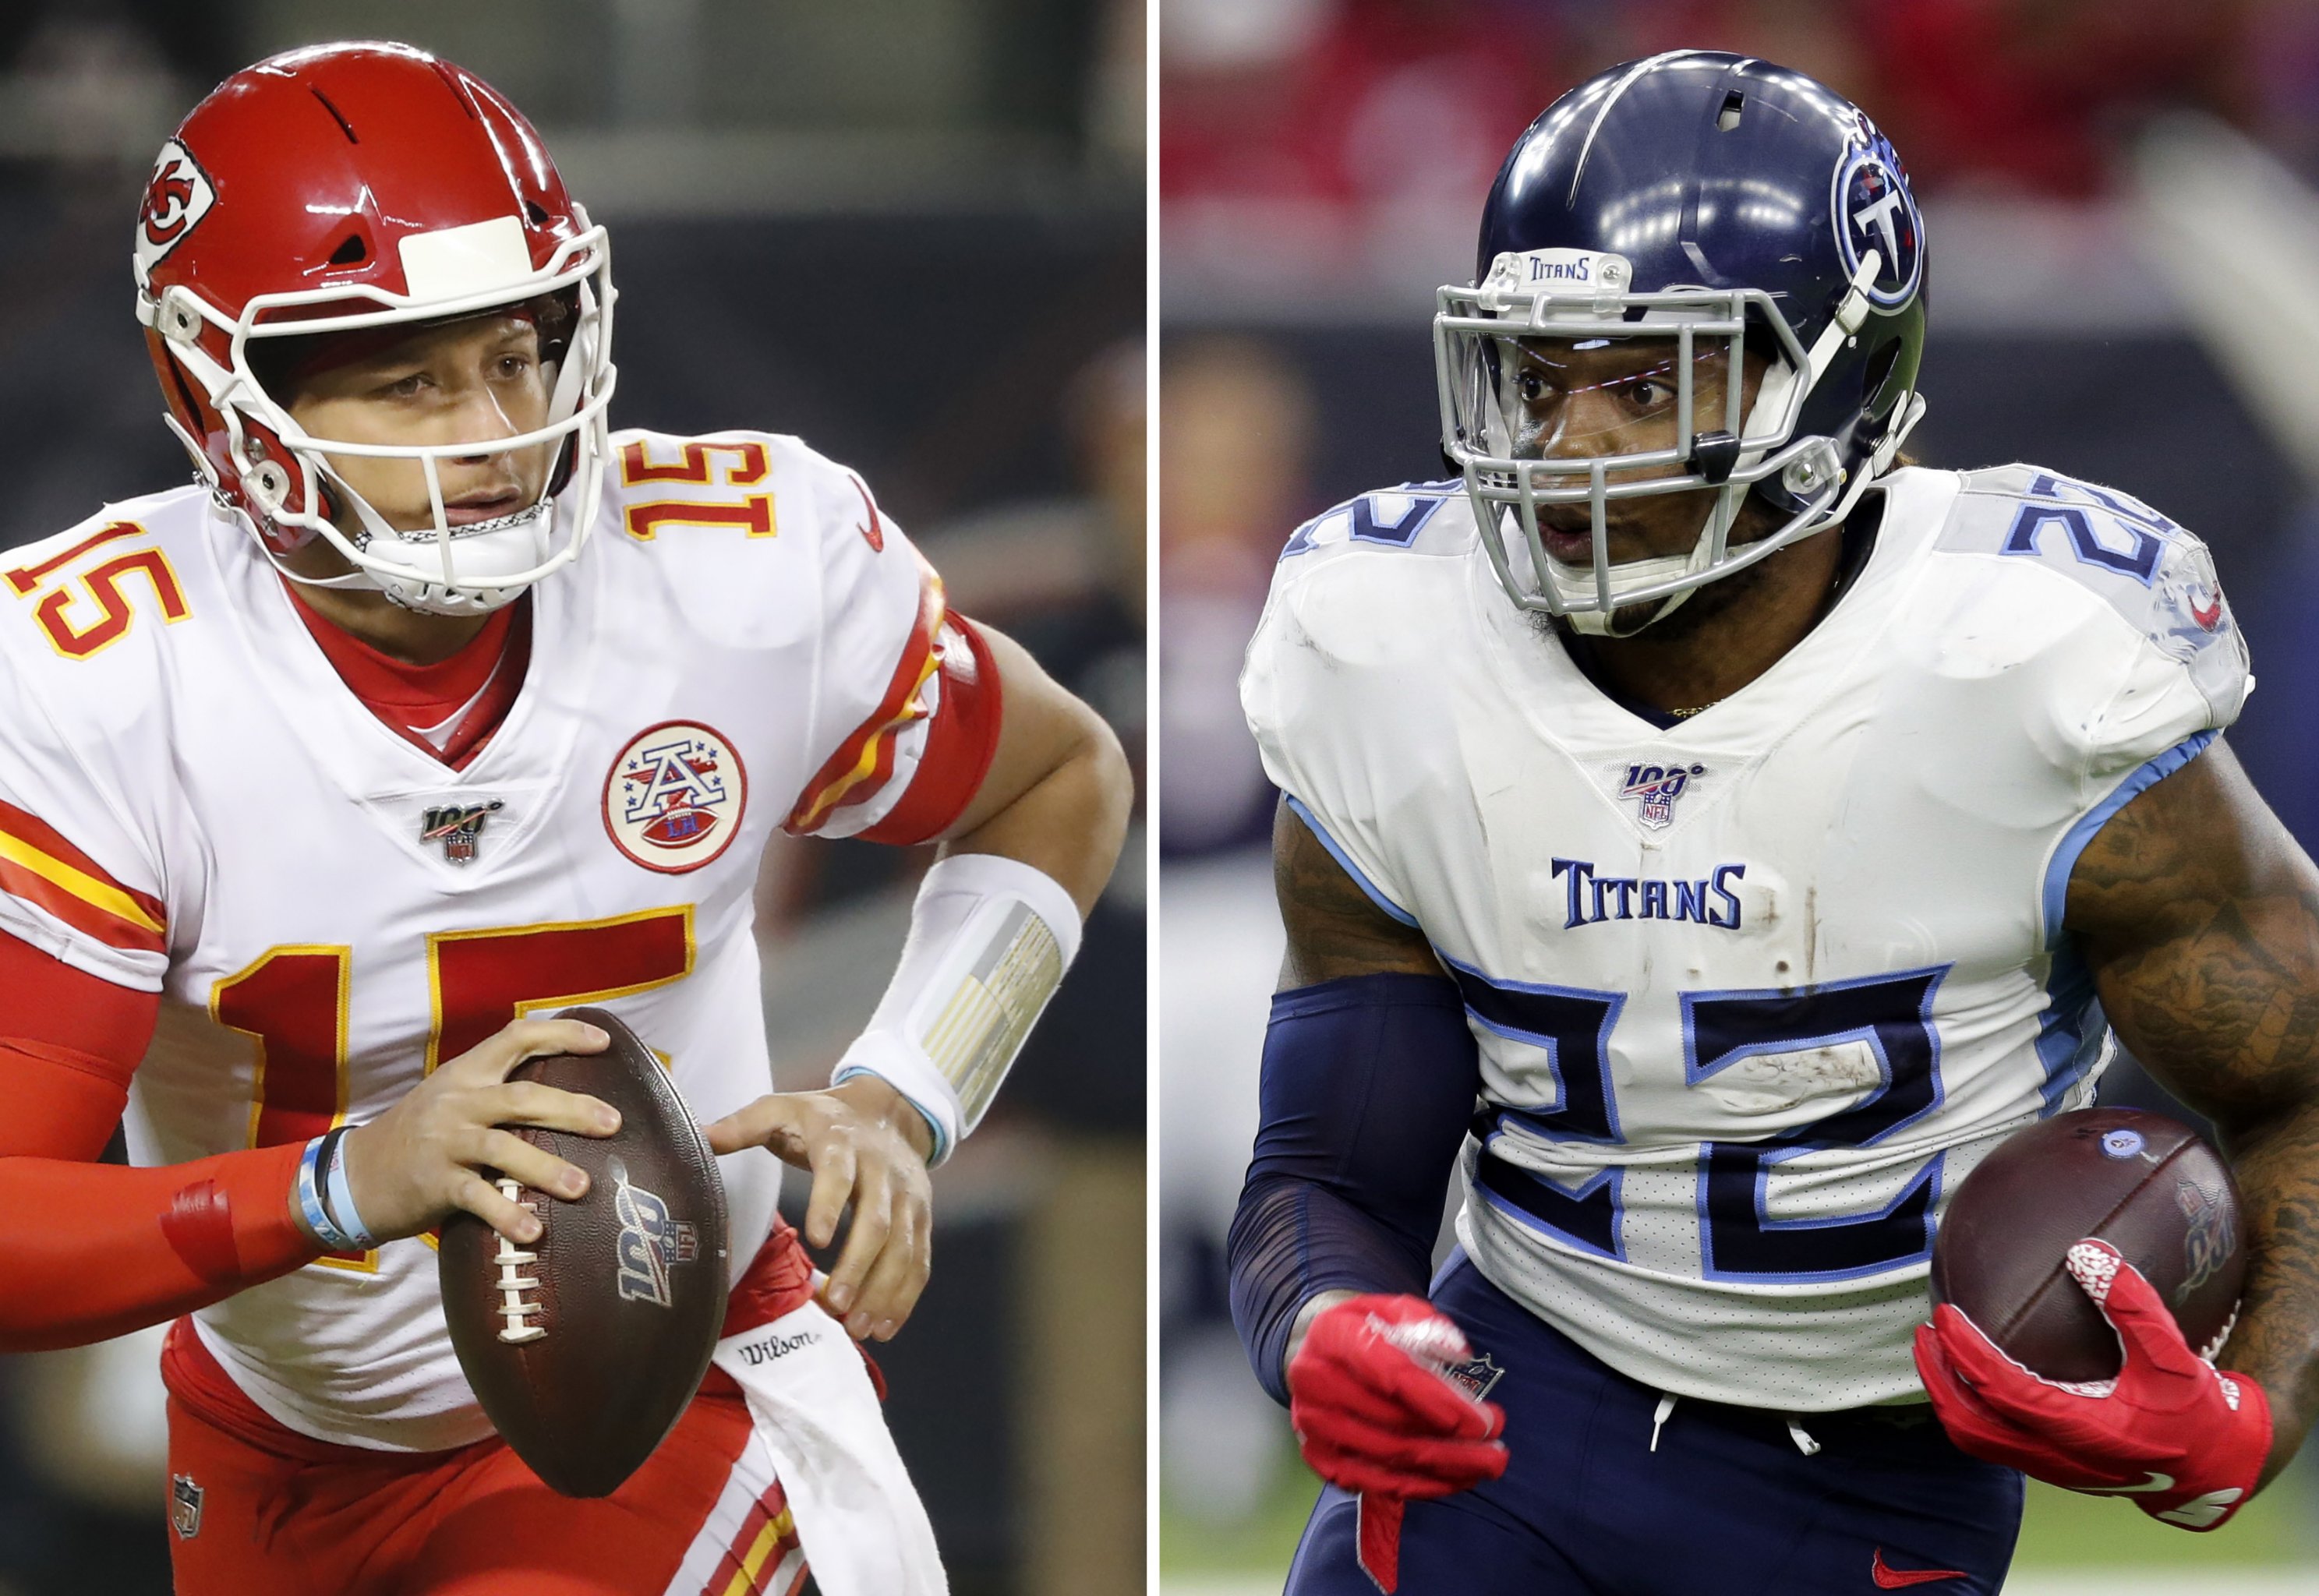 NFL odds, lines, picks, predictions for 2021 Super Bowl: Top model leaning  over in Chiefs vs. Buccaneers 